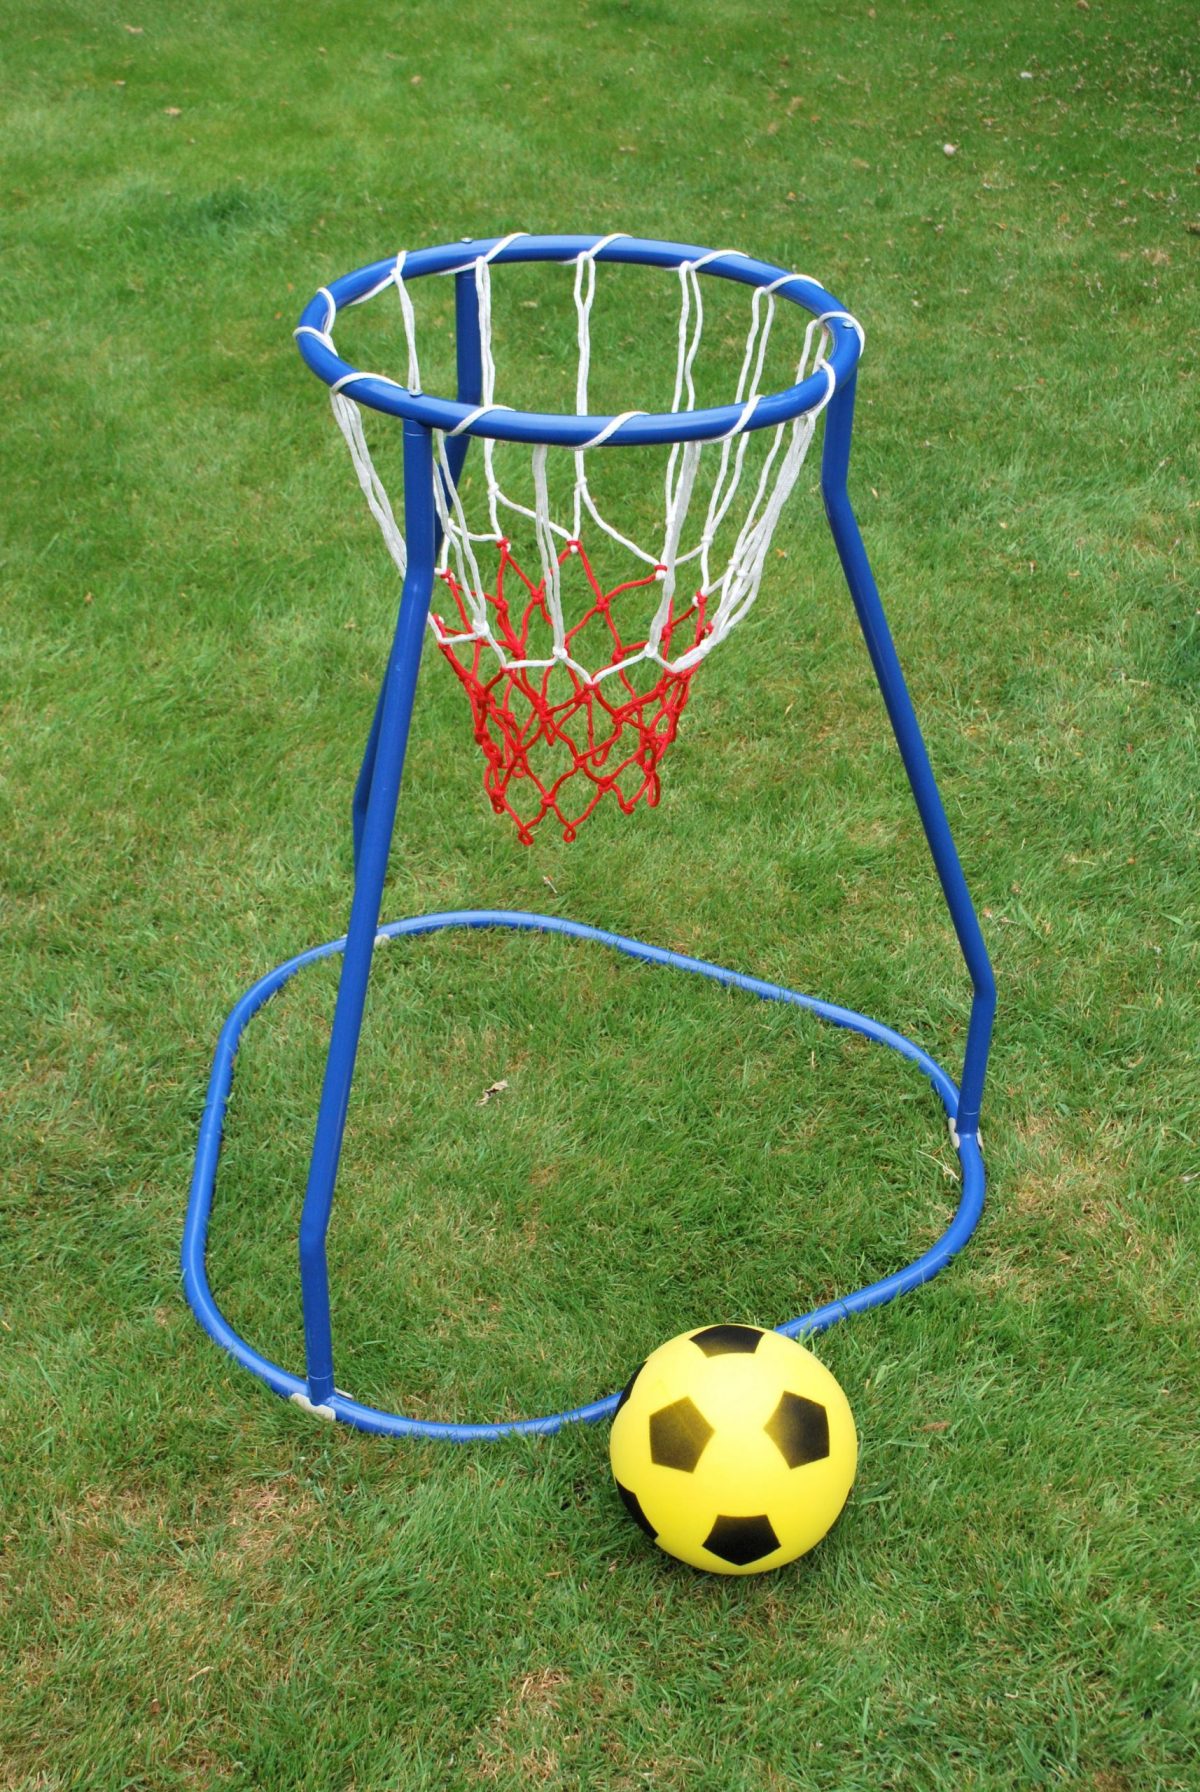 Free Standing Basketball Stand